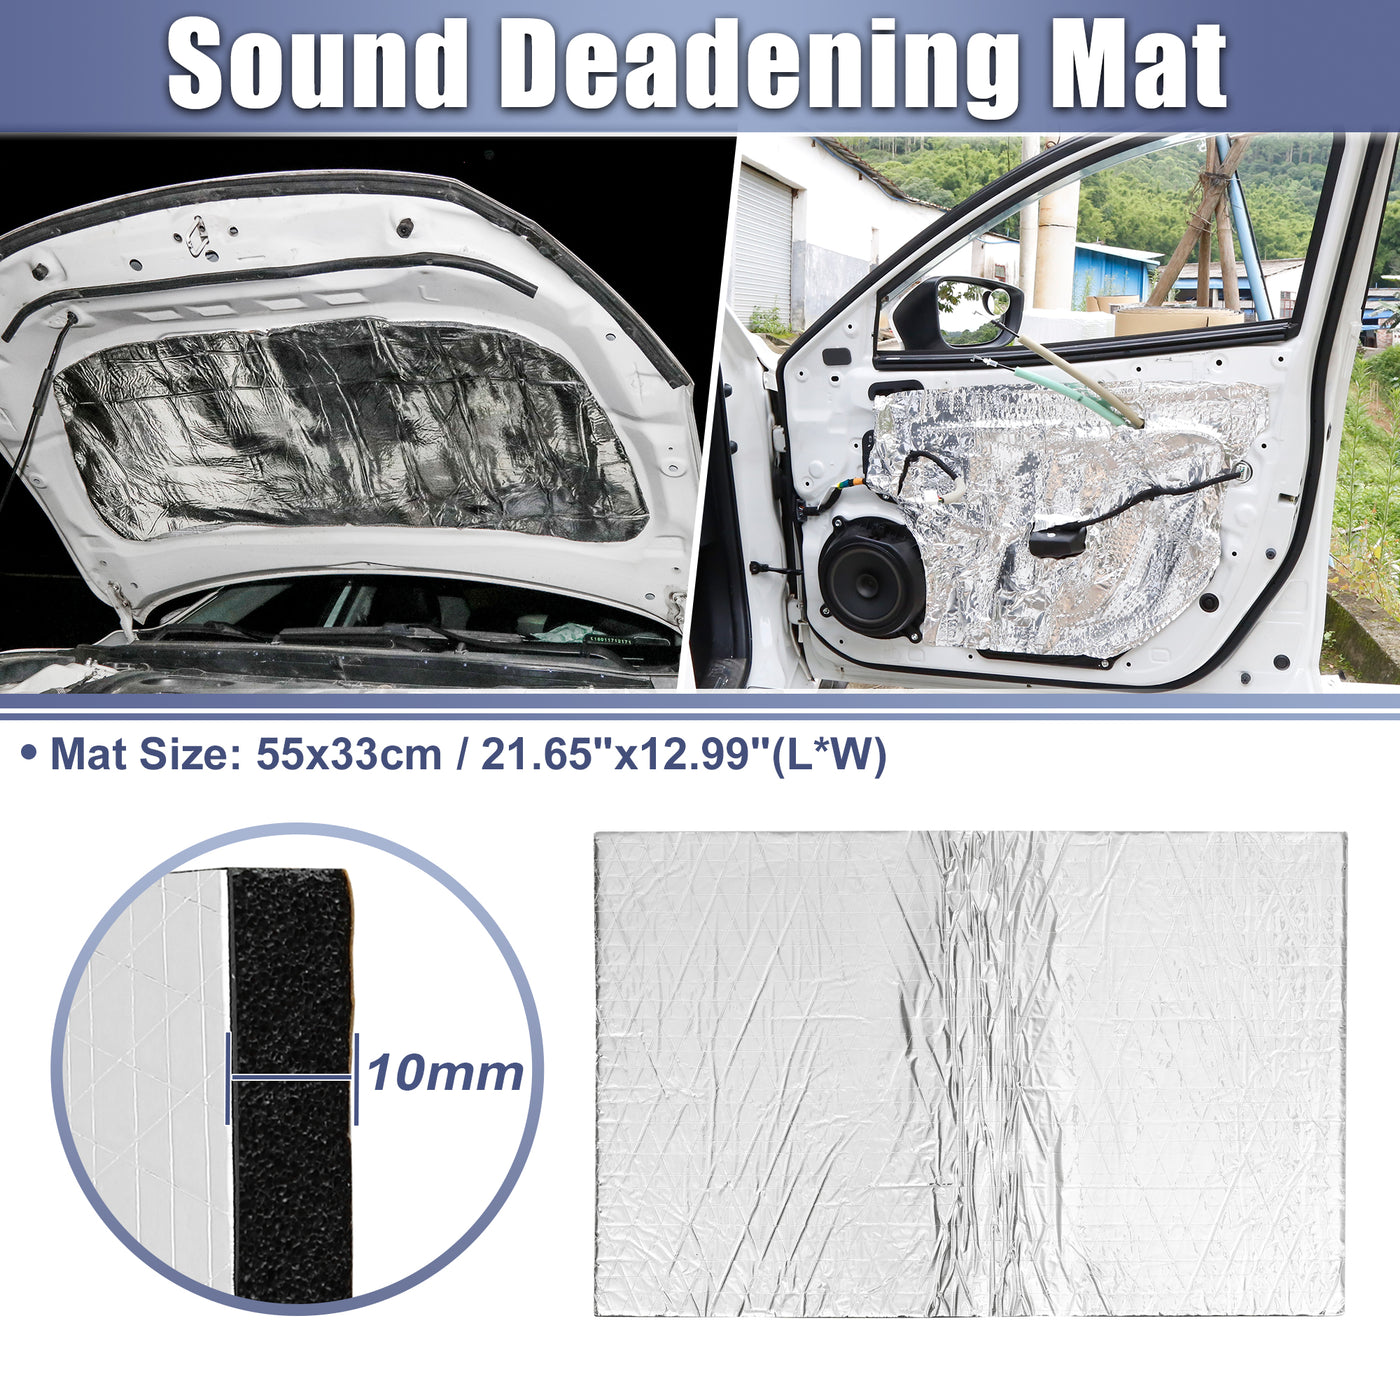 X AUTOHAUX 394mil 10mm 1.77sqft Car Sound Deadening Mat Aluminum Foil Closed Cell Foam Heat Shield Material Damping Self Adhesive Universal for Hood Fender and Boat Engine Cover 21.65"x12.99"